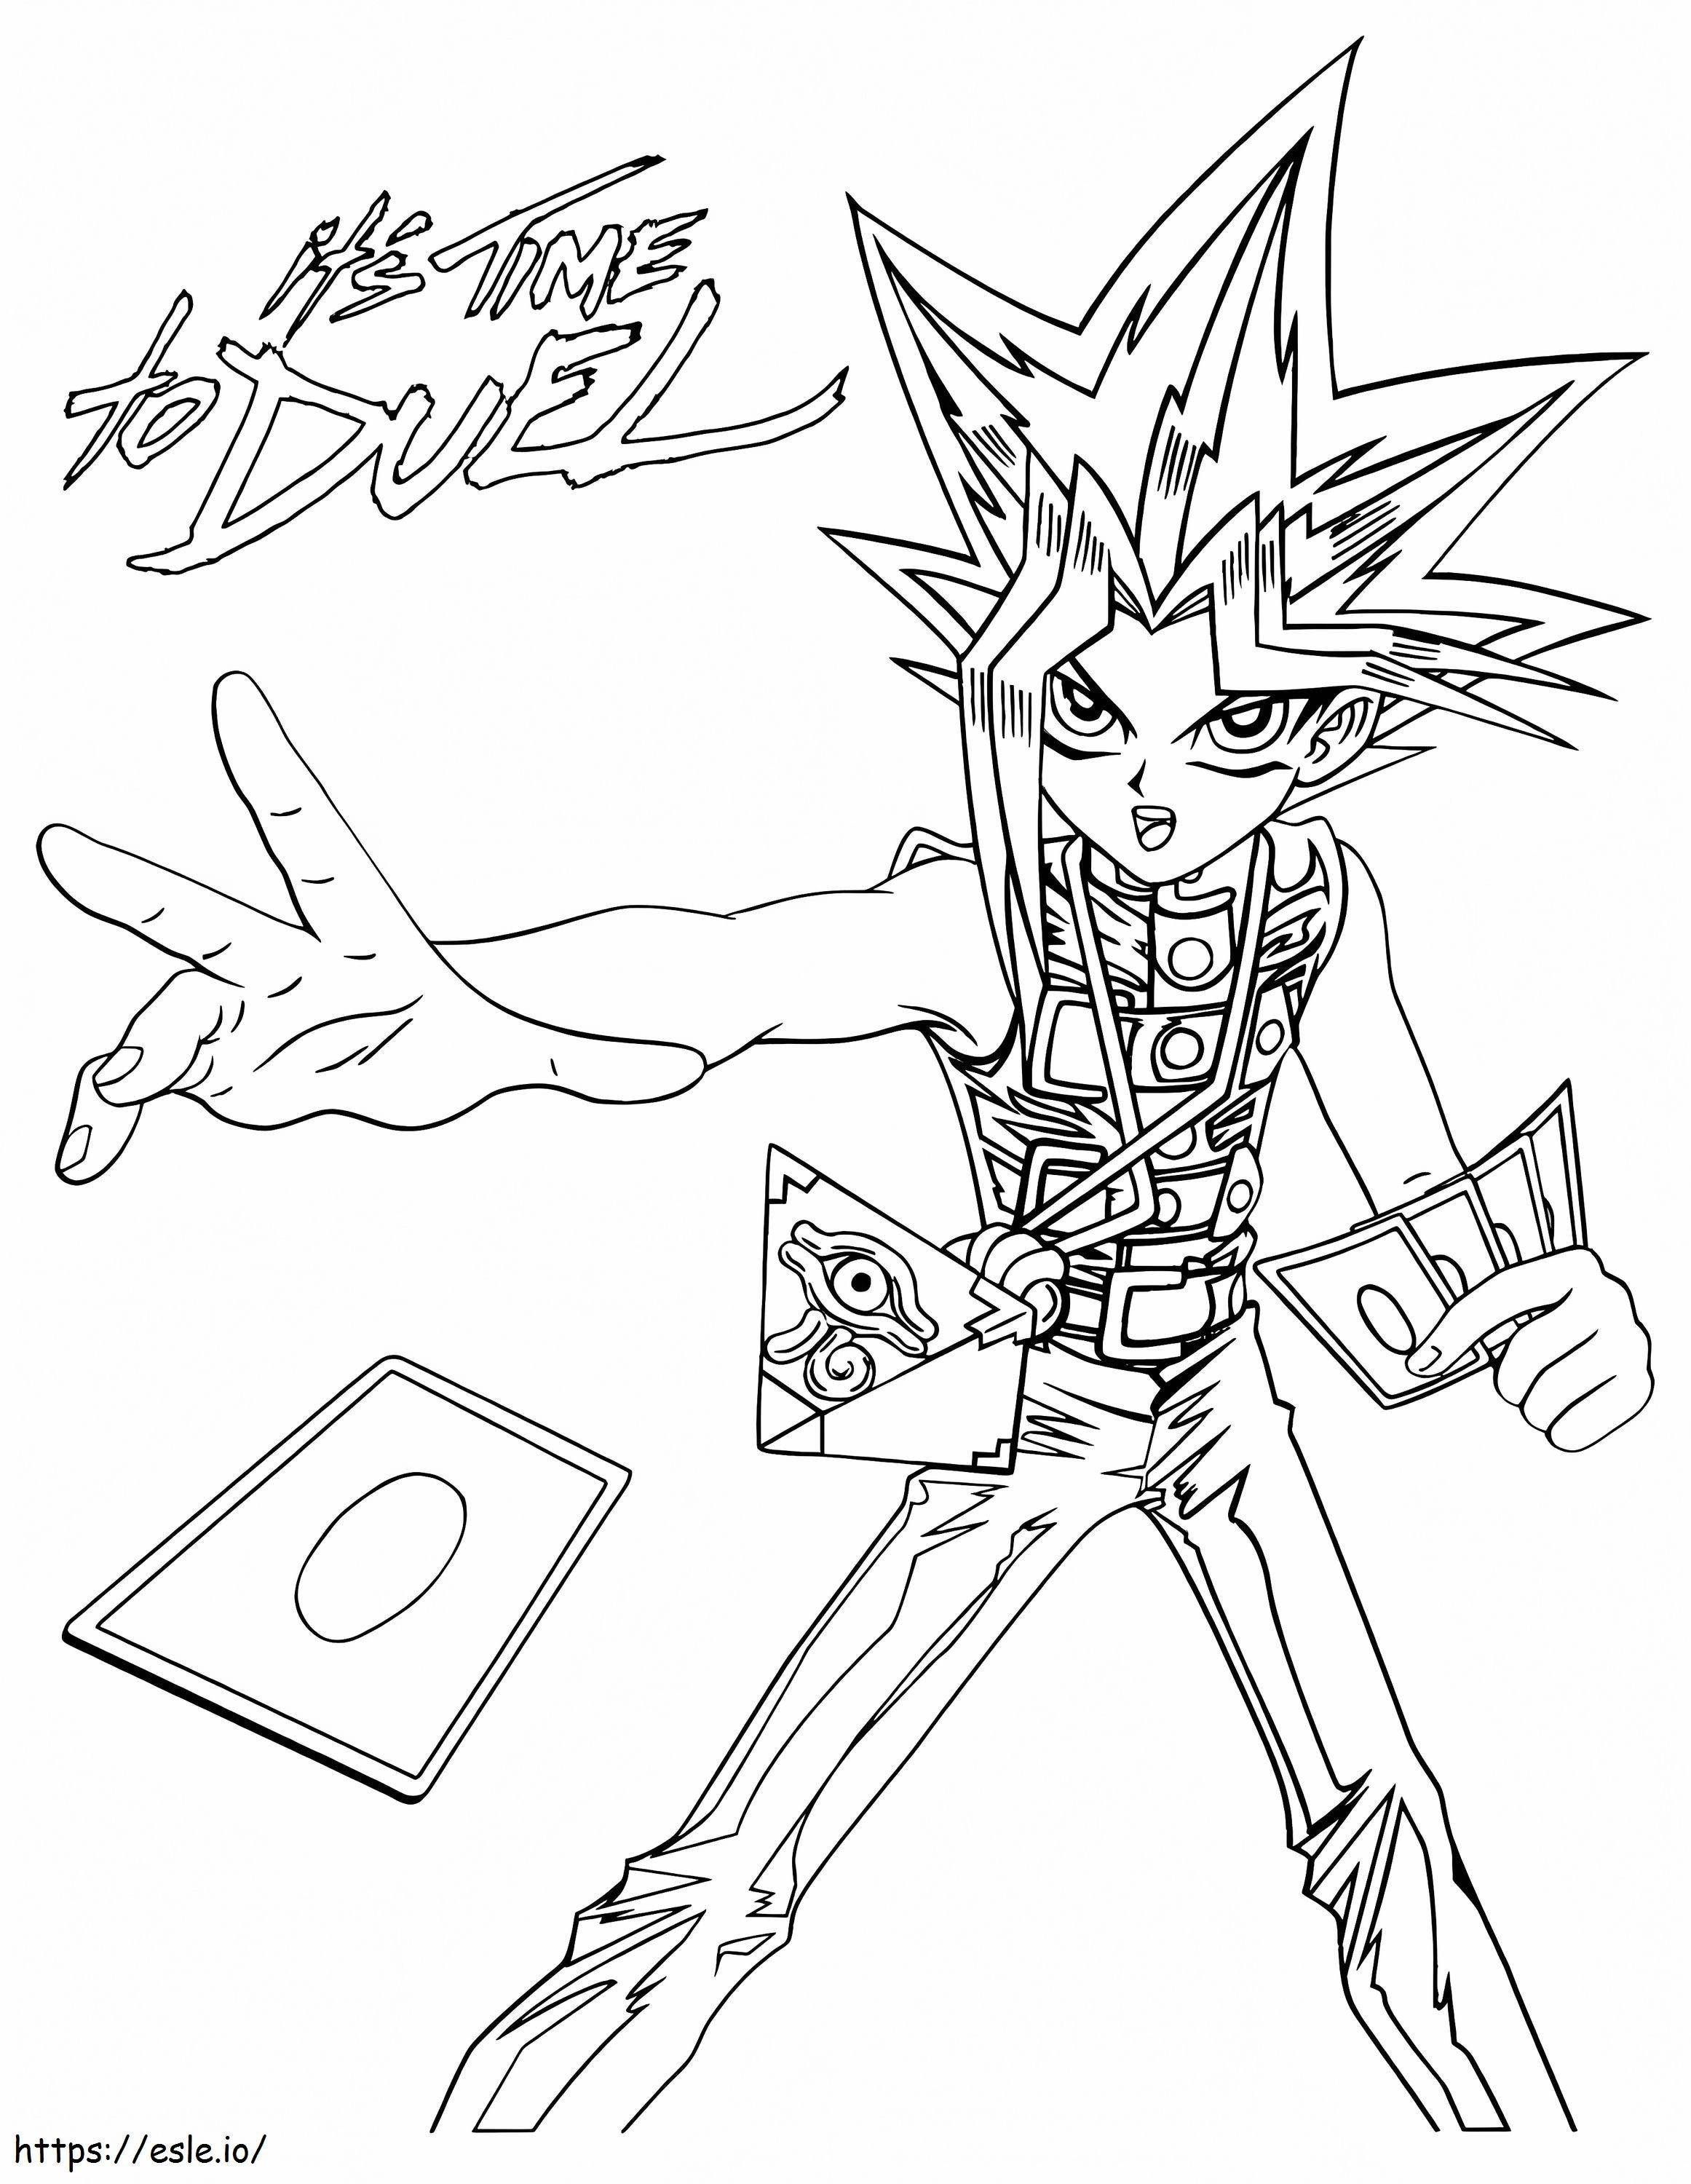 Action Yu Gi Oh coloring page